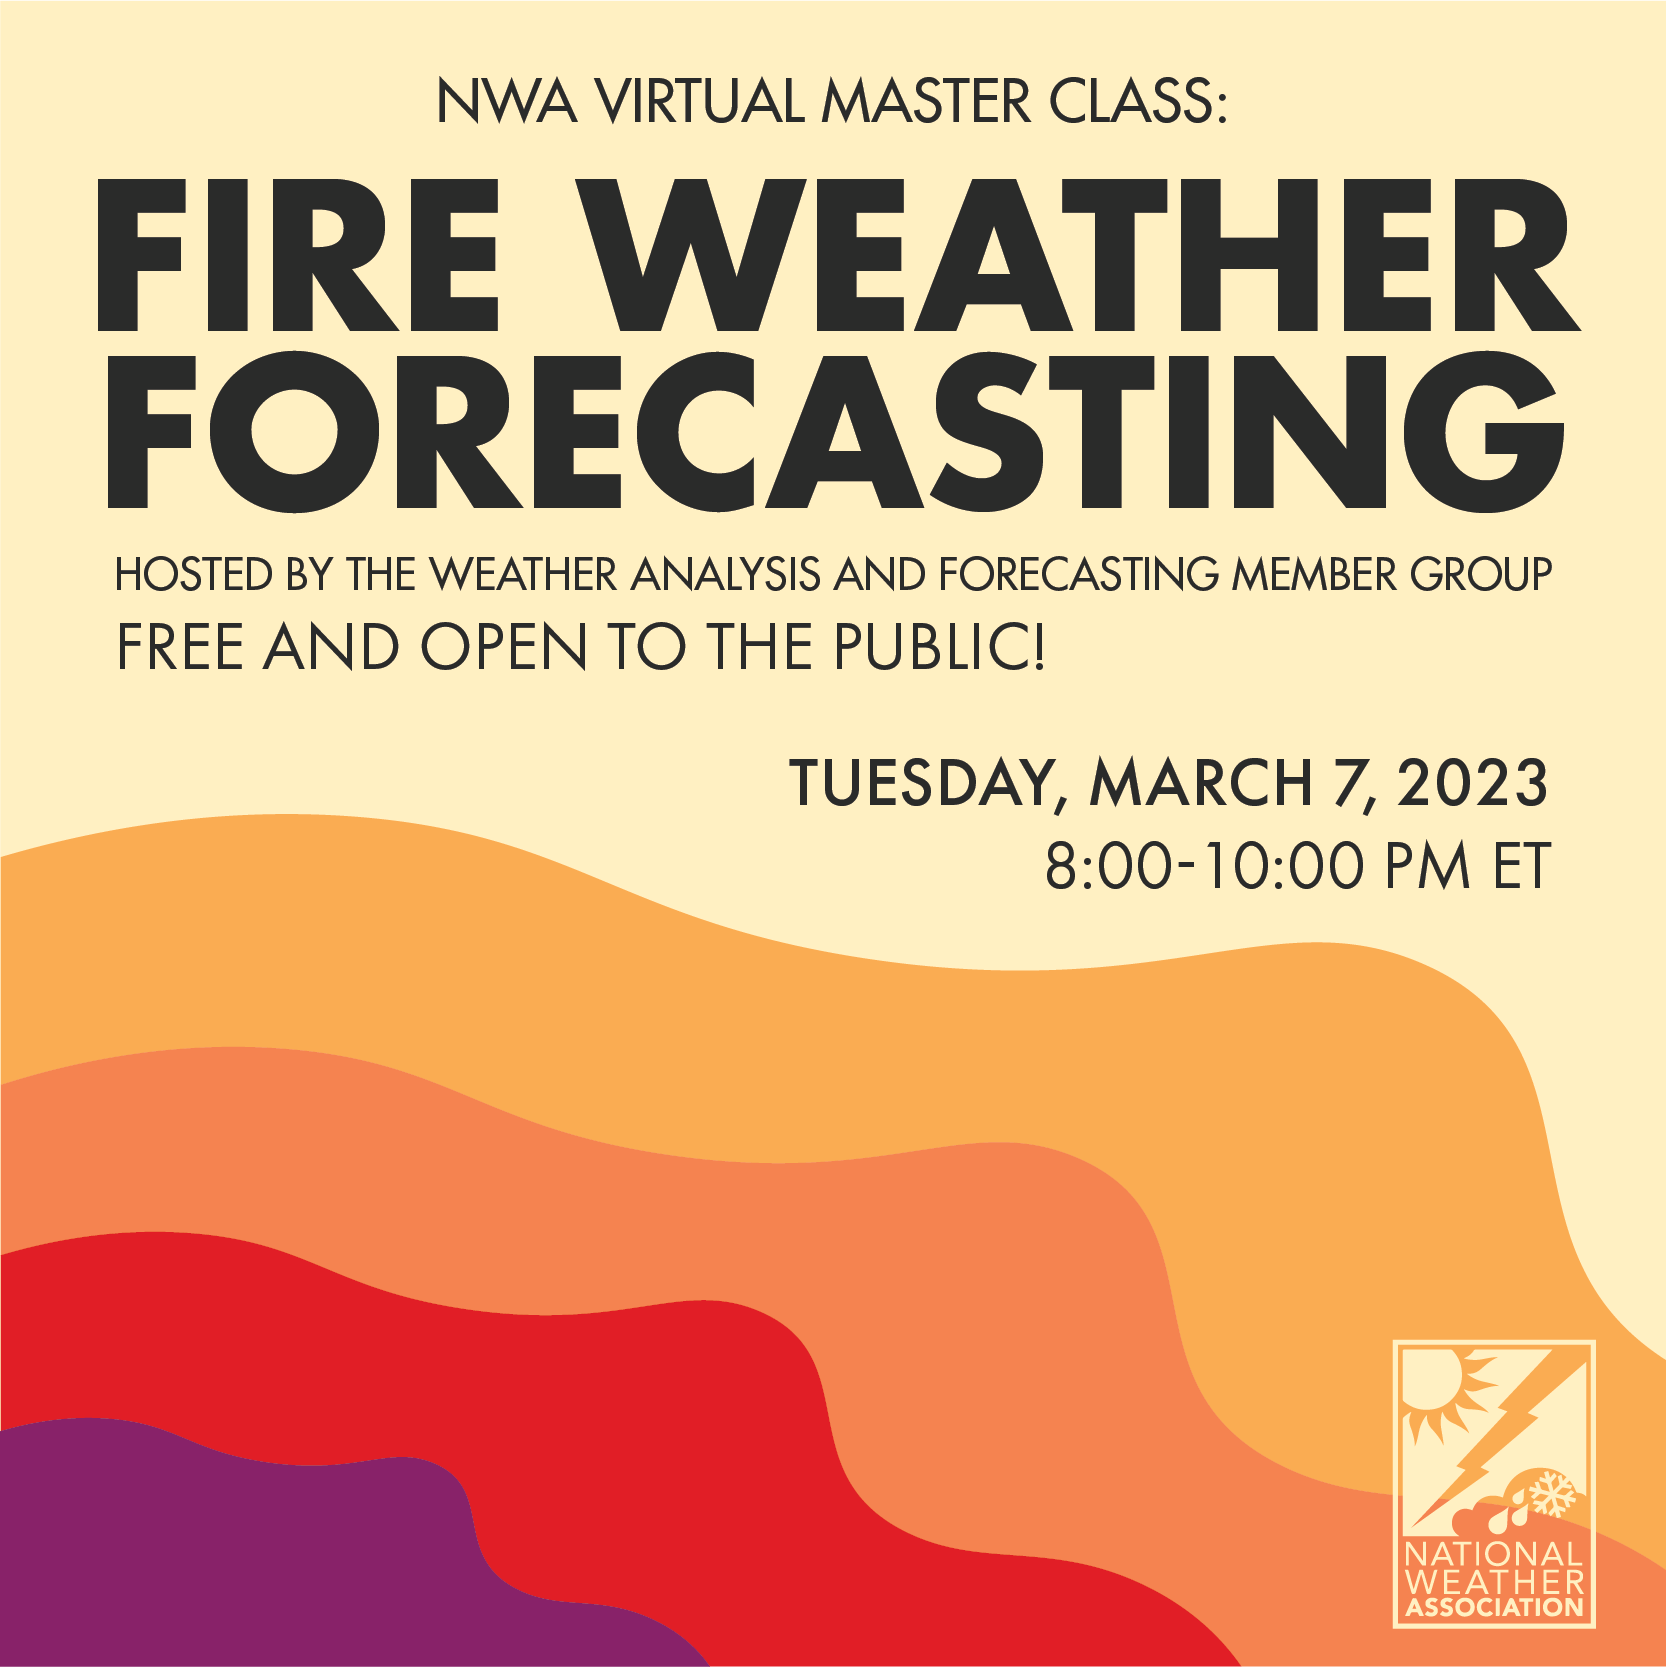 NWA VIRTUAL MASTER CLASS: FIRE WEATHER FORECASTING HOSTED BY THE WEATHER ANALYSIS AND FORECASTING MEMBER GROUP FREE AND OPEN TO THE PUBLIC! TUESDAY, MARCH 7, 2023 8:00-10:00 PM ET